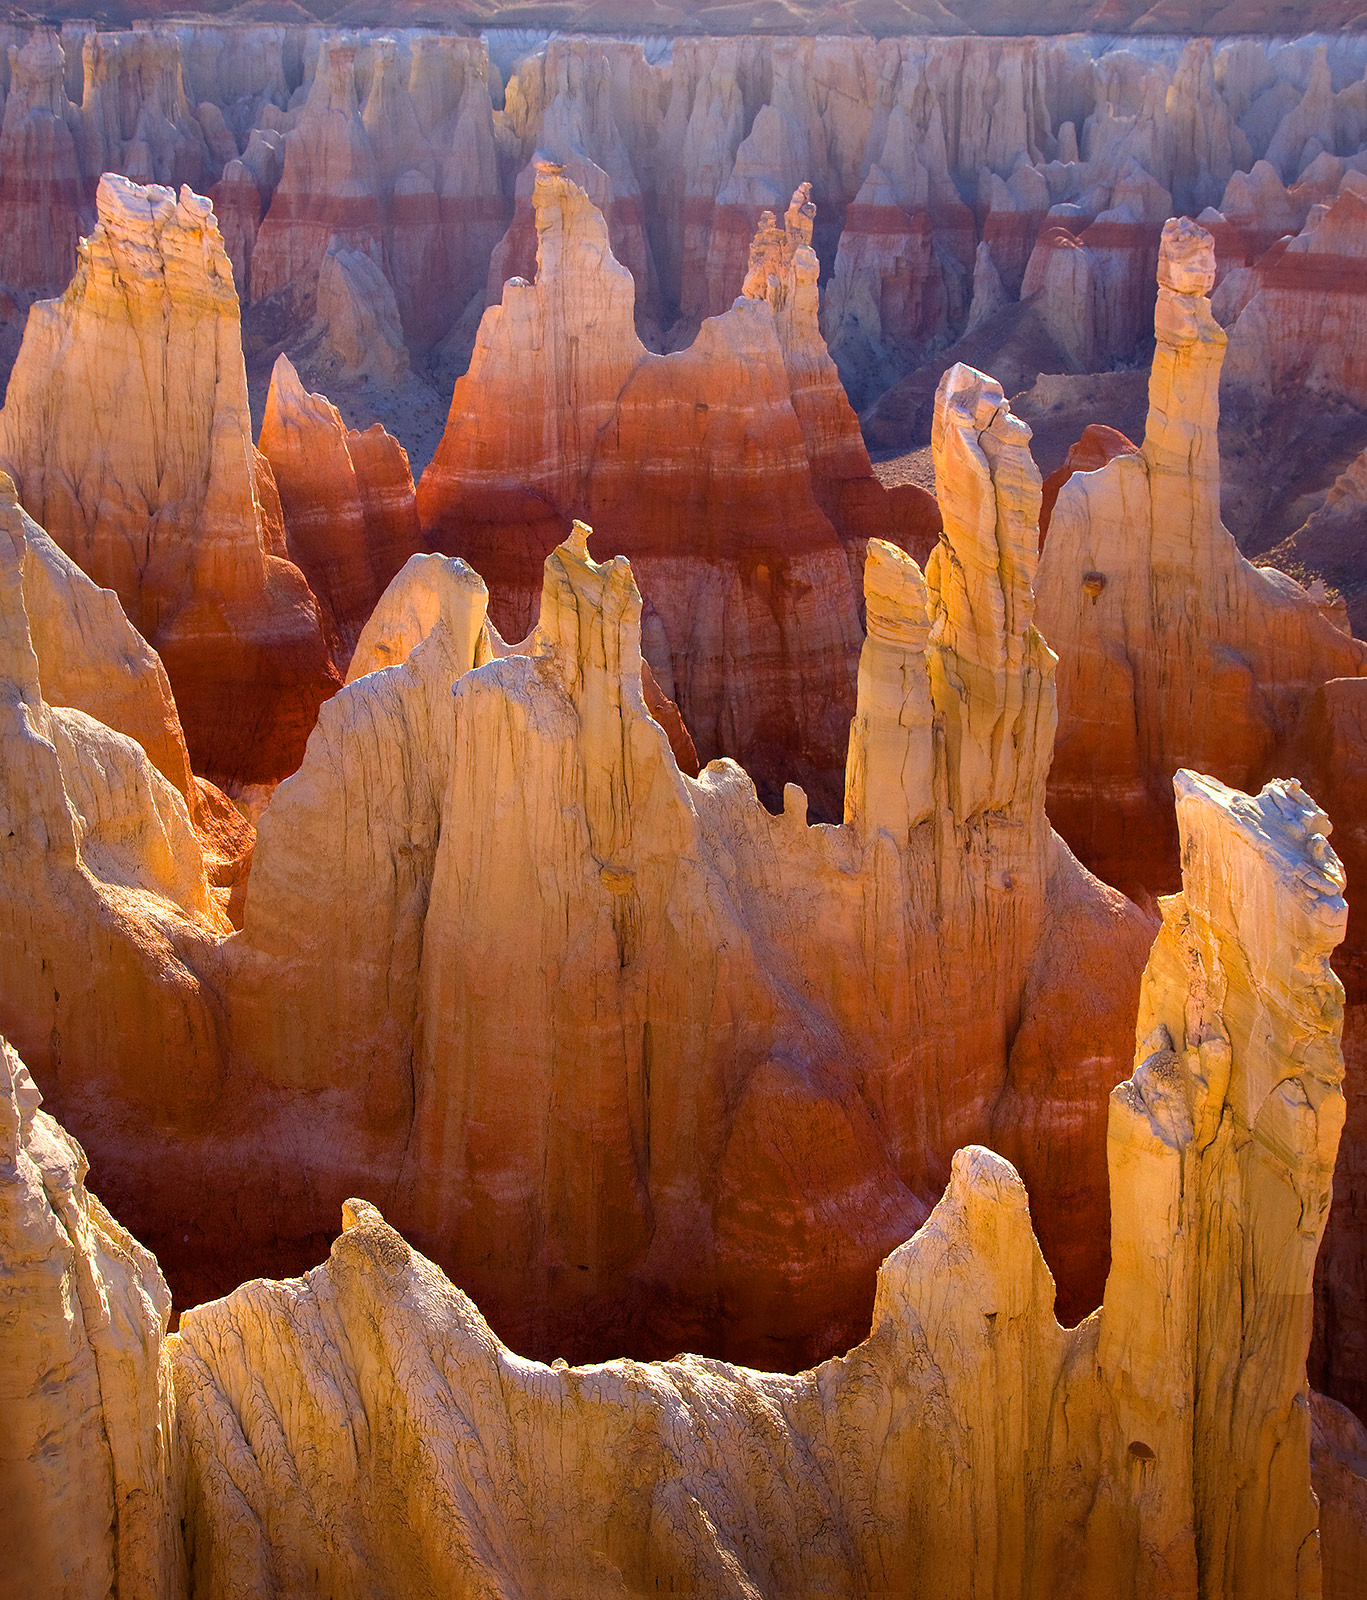 Steep and colorful rock formations backlit at sunrise in the Arizona desert.